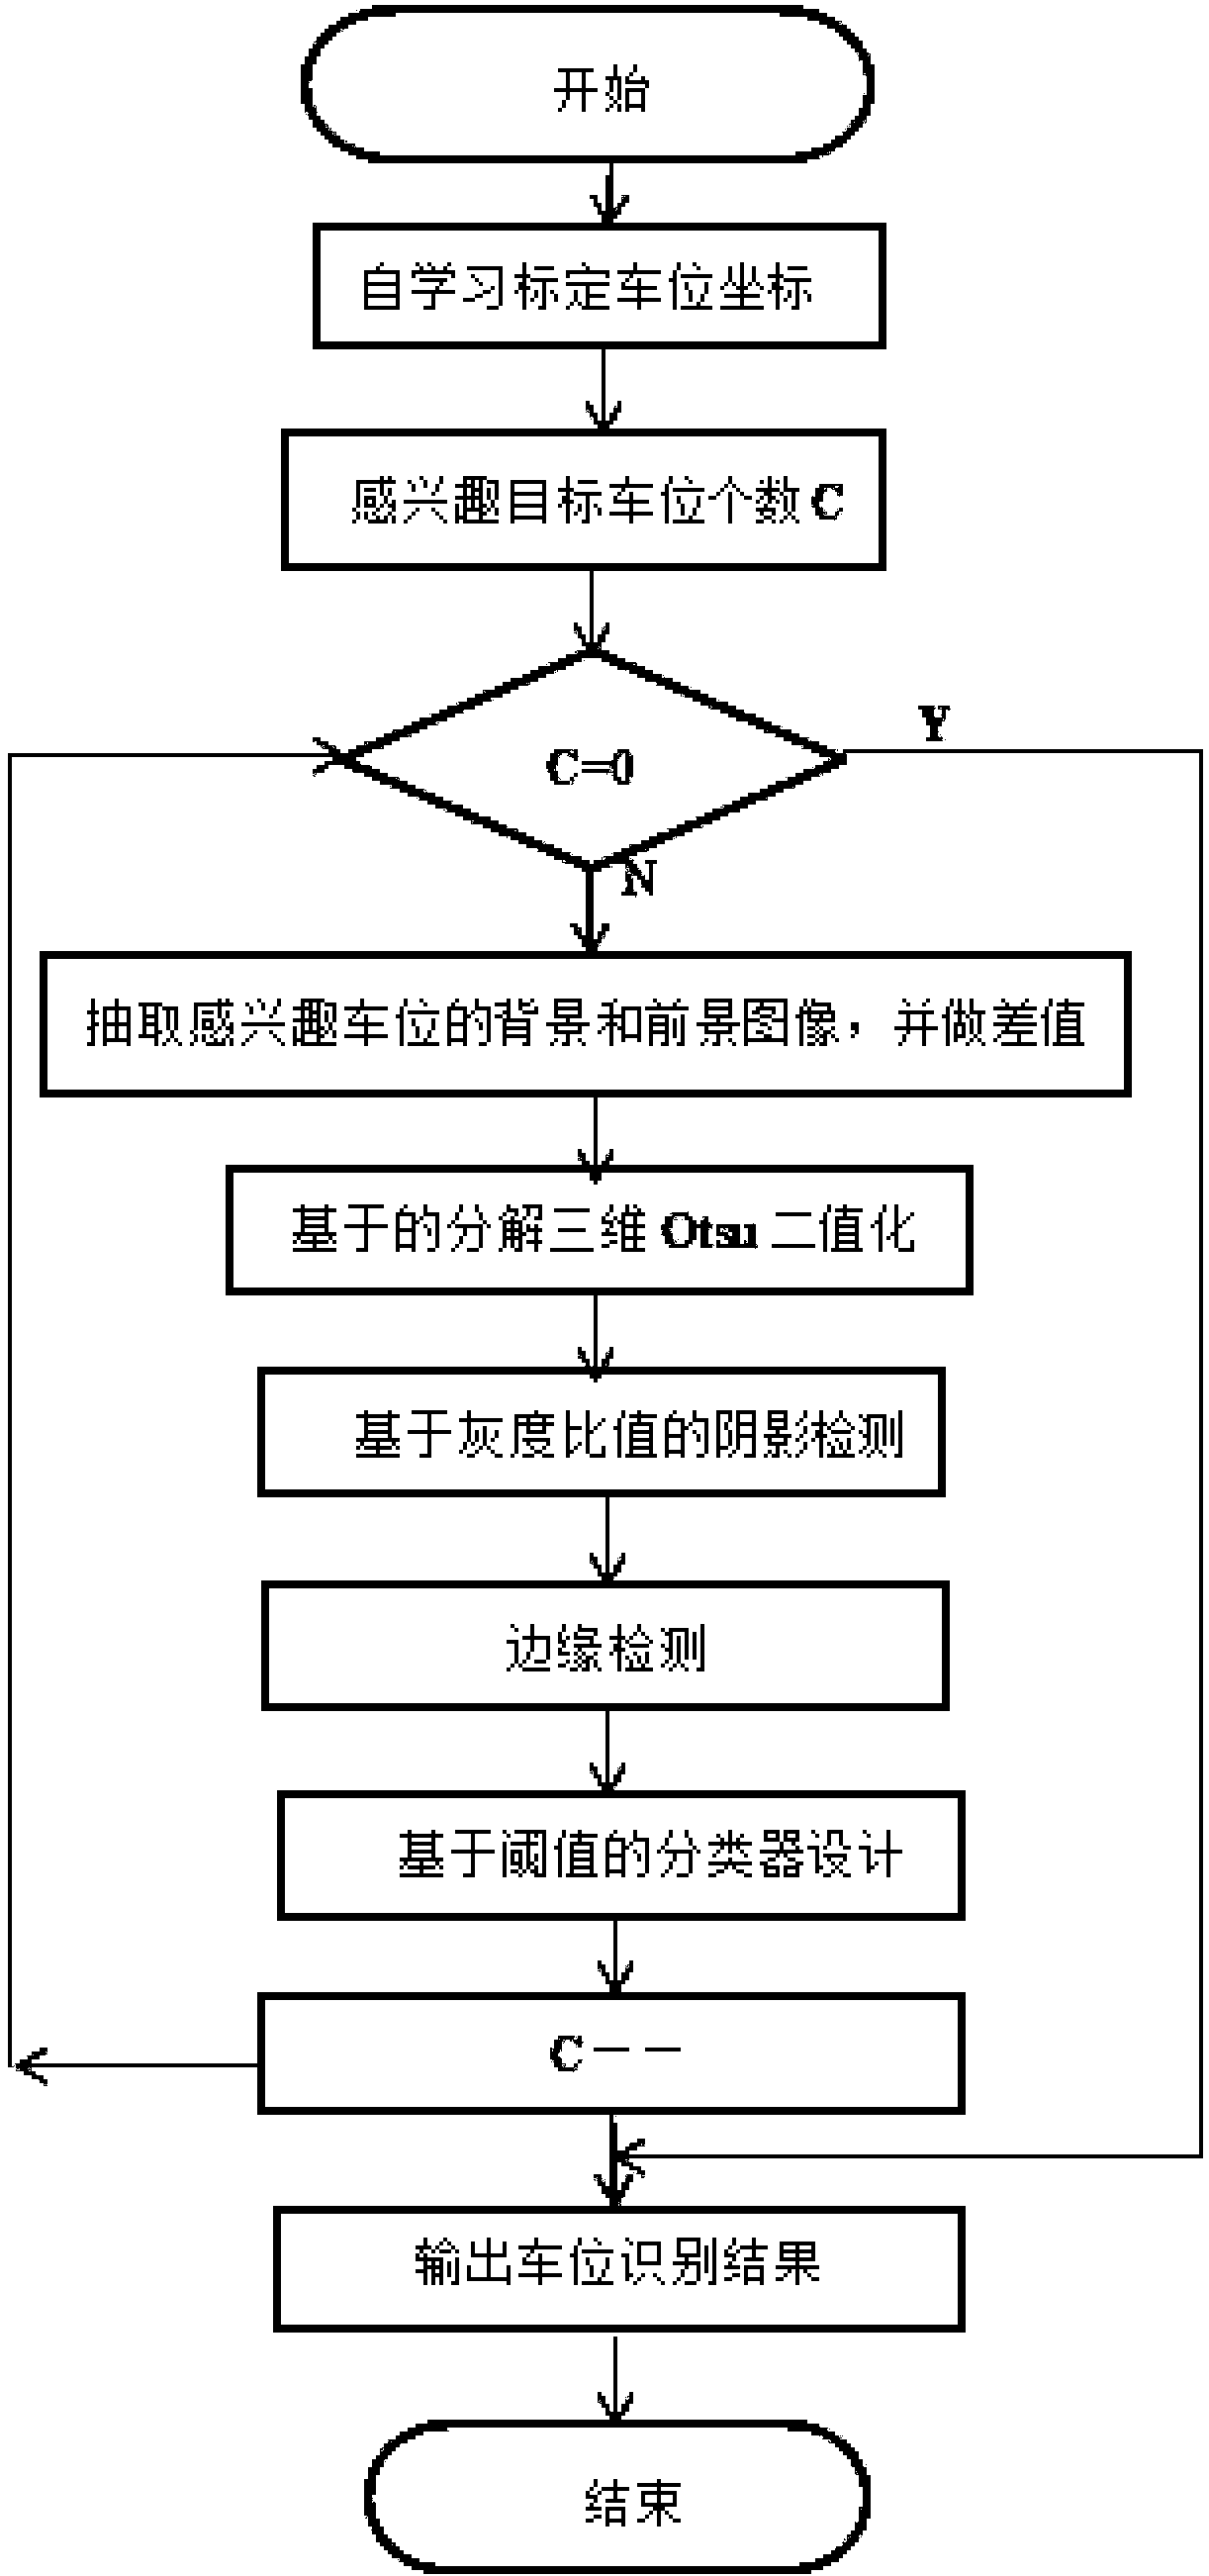 Monitoring image based intelligent parking lot parking place identification method and system